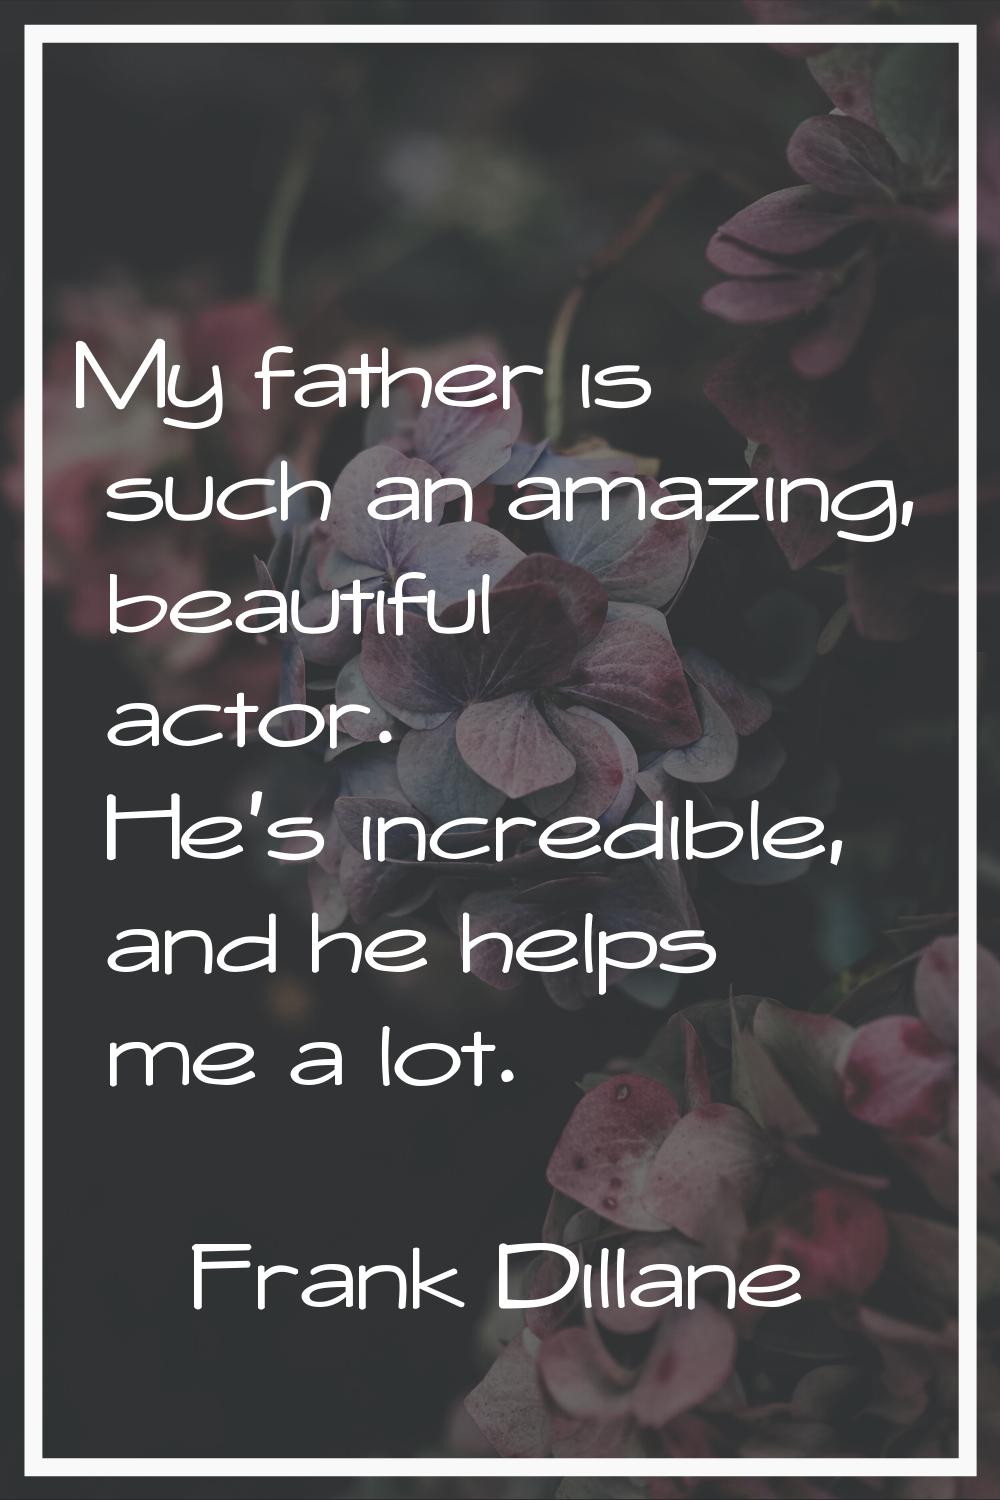 My father is such an amazing, beautiful actor. He's incredible, and he helps me a lot.